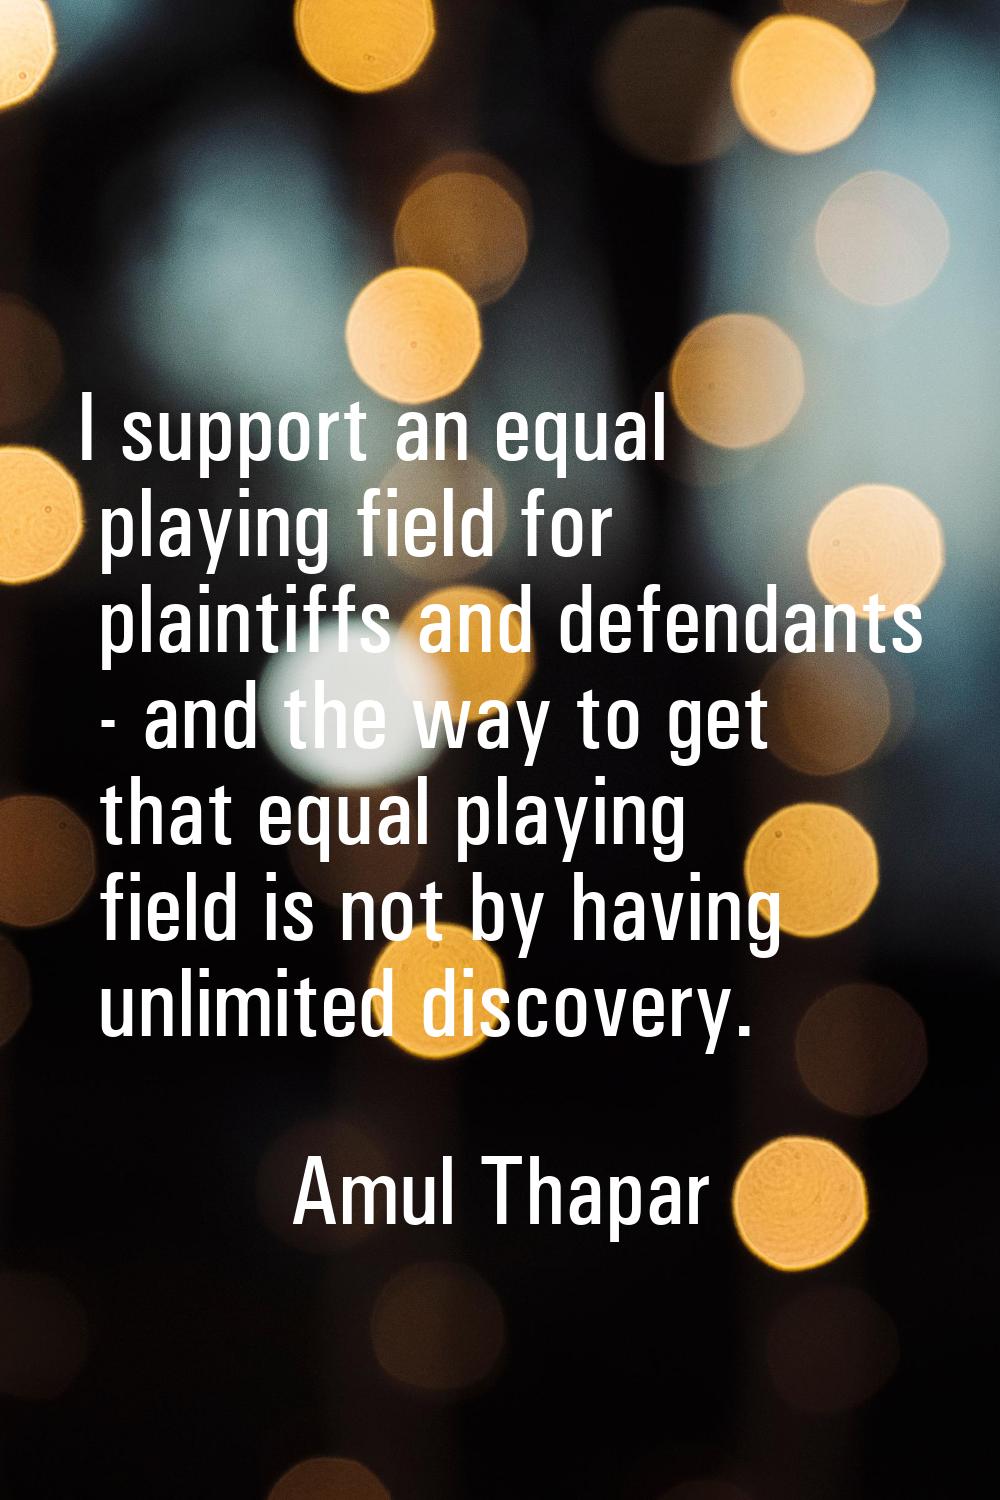 I support an equal playing field for plaintiffs and defendants - and the way to get that equal play